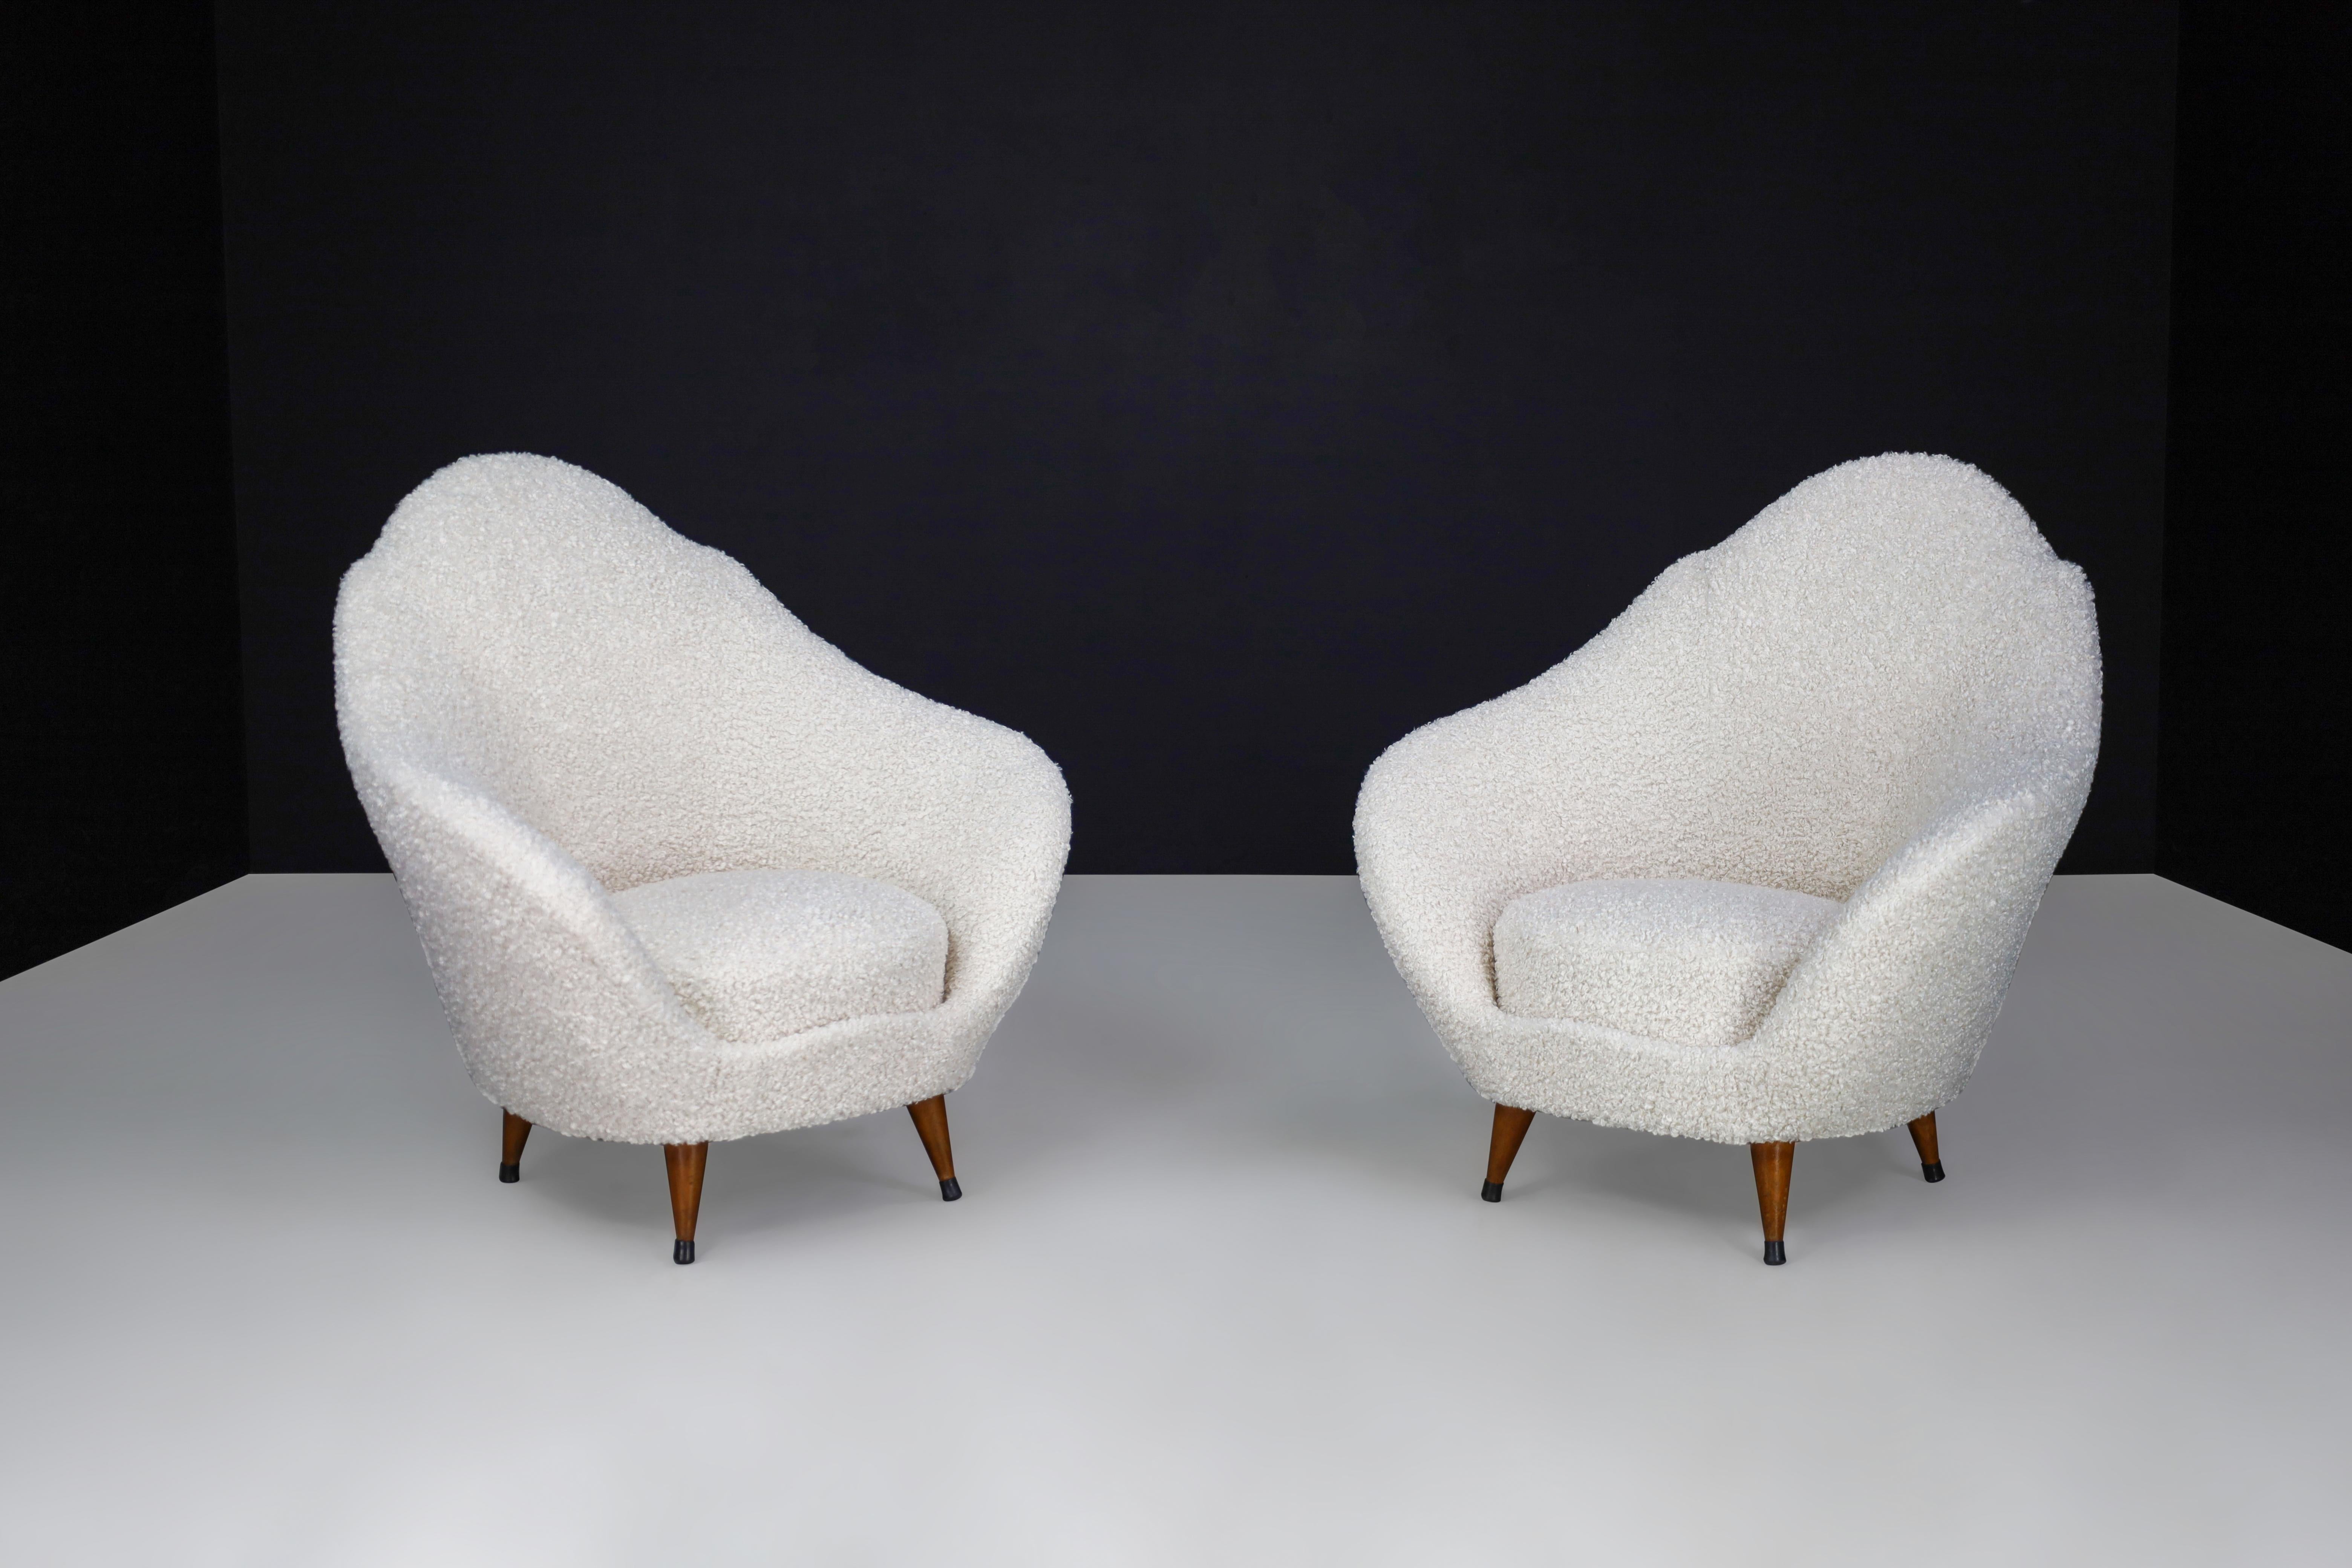 Federico Munari Lounge Chairs with Conical Feet and Teddy Upholstery, Italy 1940s.
The lounge chairs we have for sale are an exceptional mid-century design by Federico Munari from Italy in the 1940s. These chairs have undergone reupholstering in